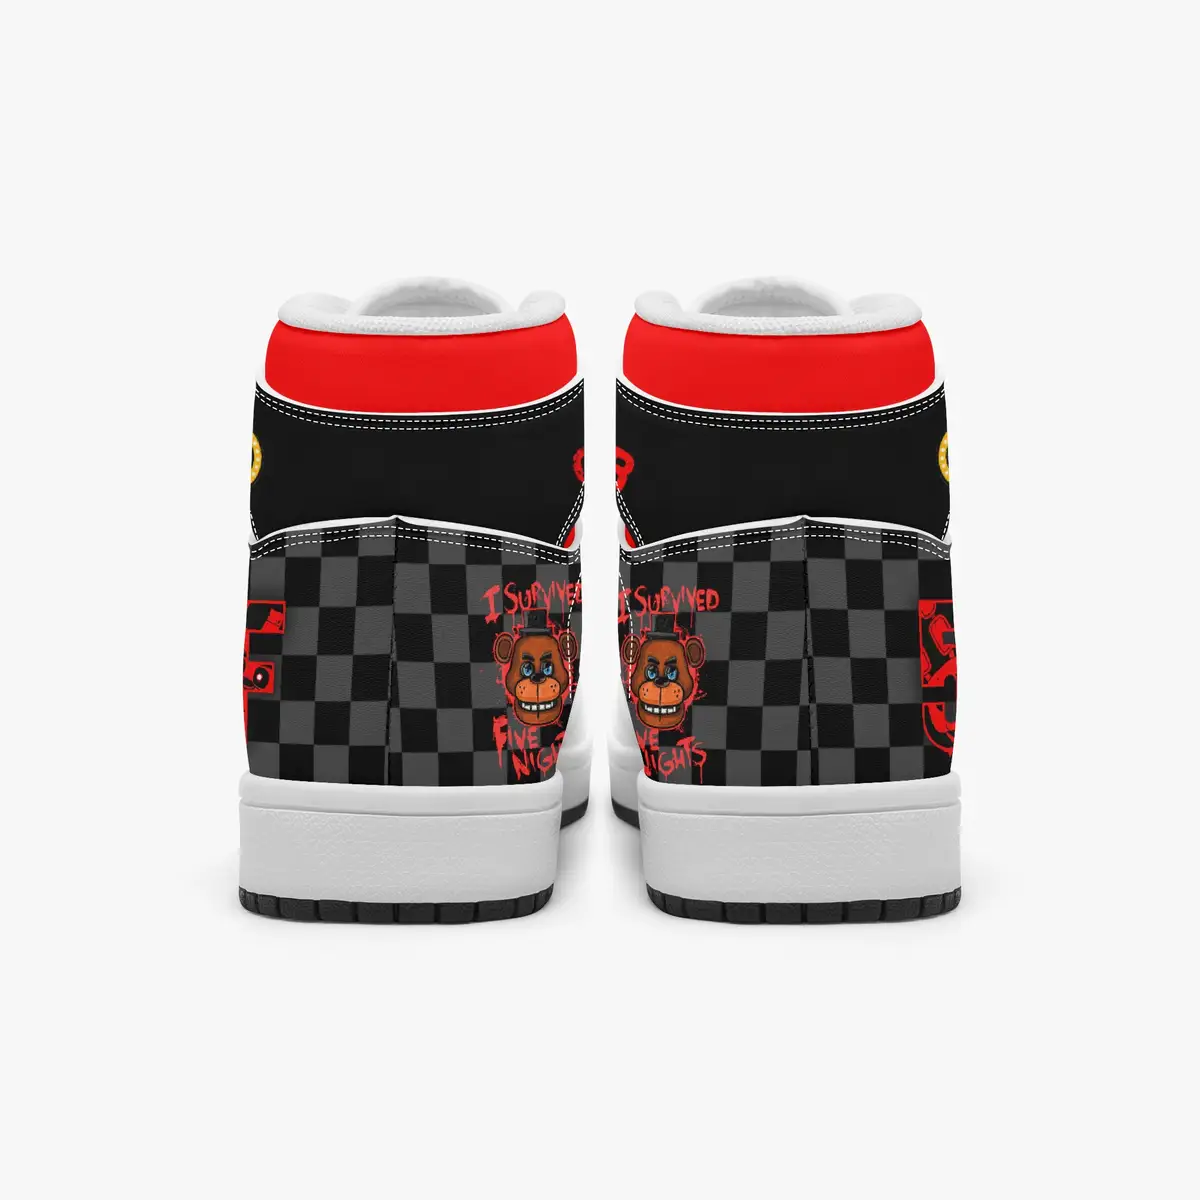 Five Nights at Freddy’s Inspired Character High-Top Kids Black and Red Leather Shoes, FNAF Jordans Style Sneakers Cool Kiddo 22